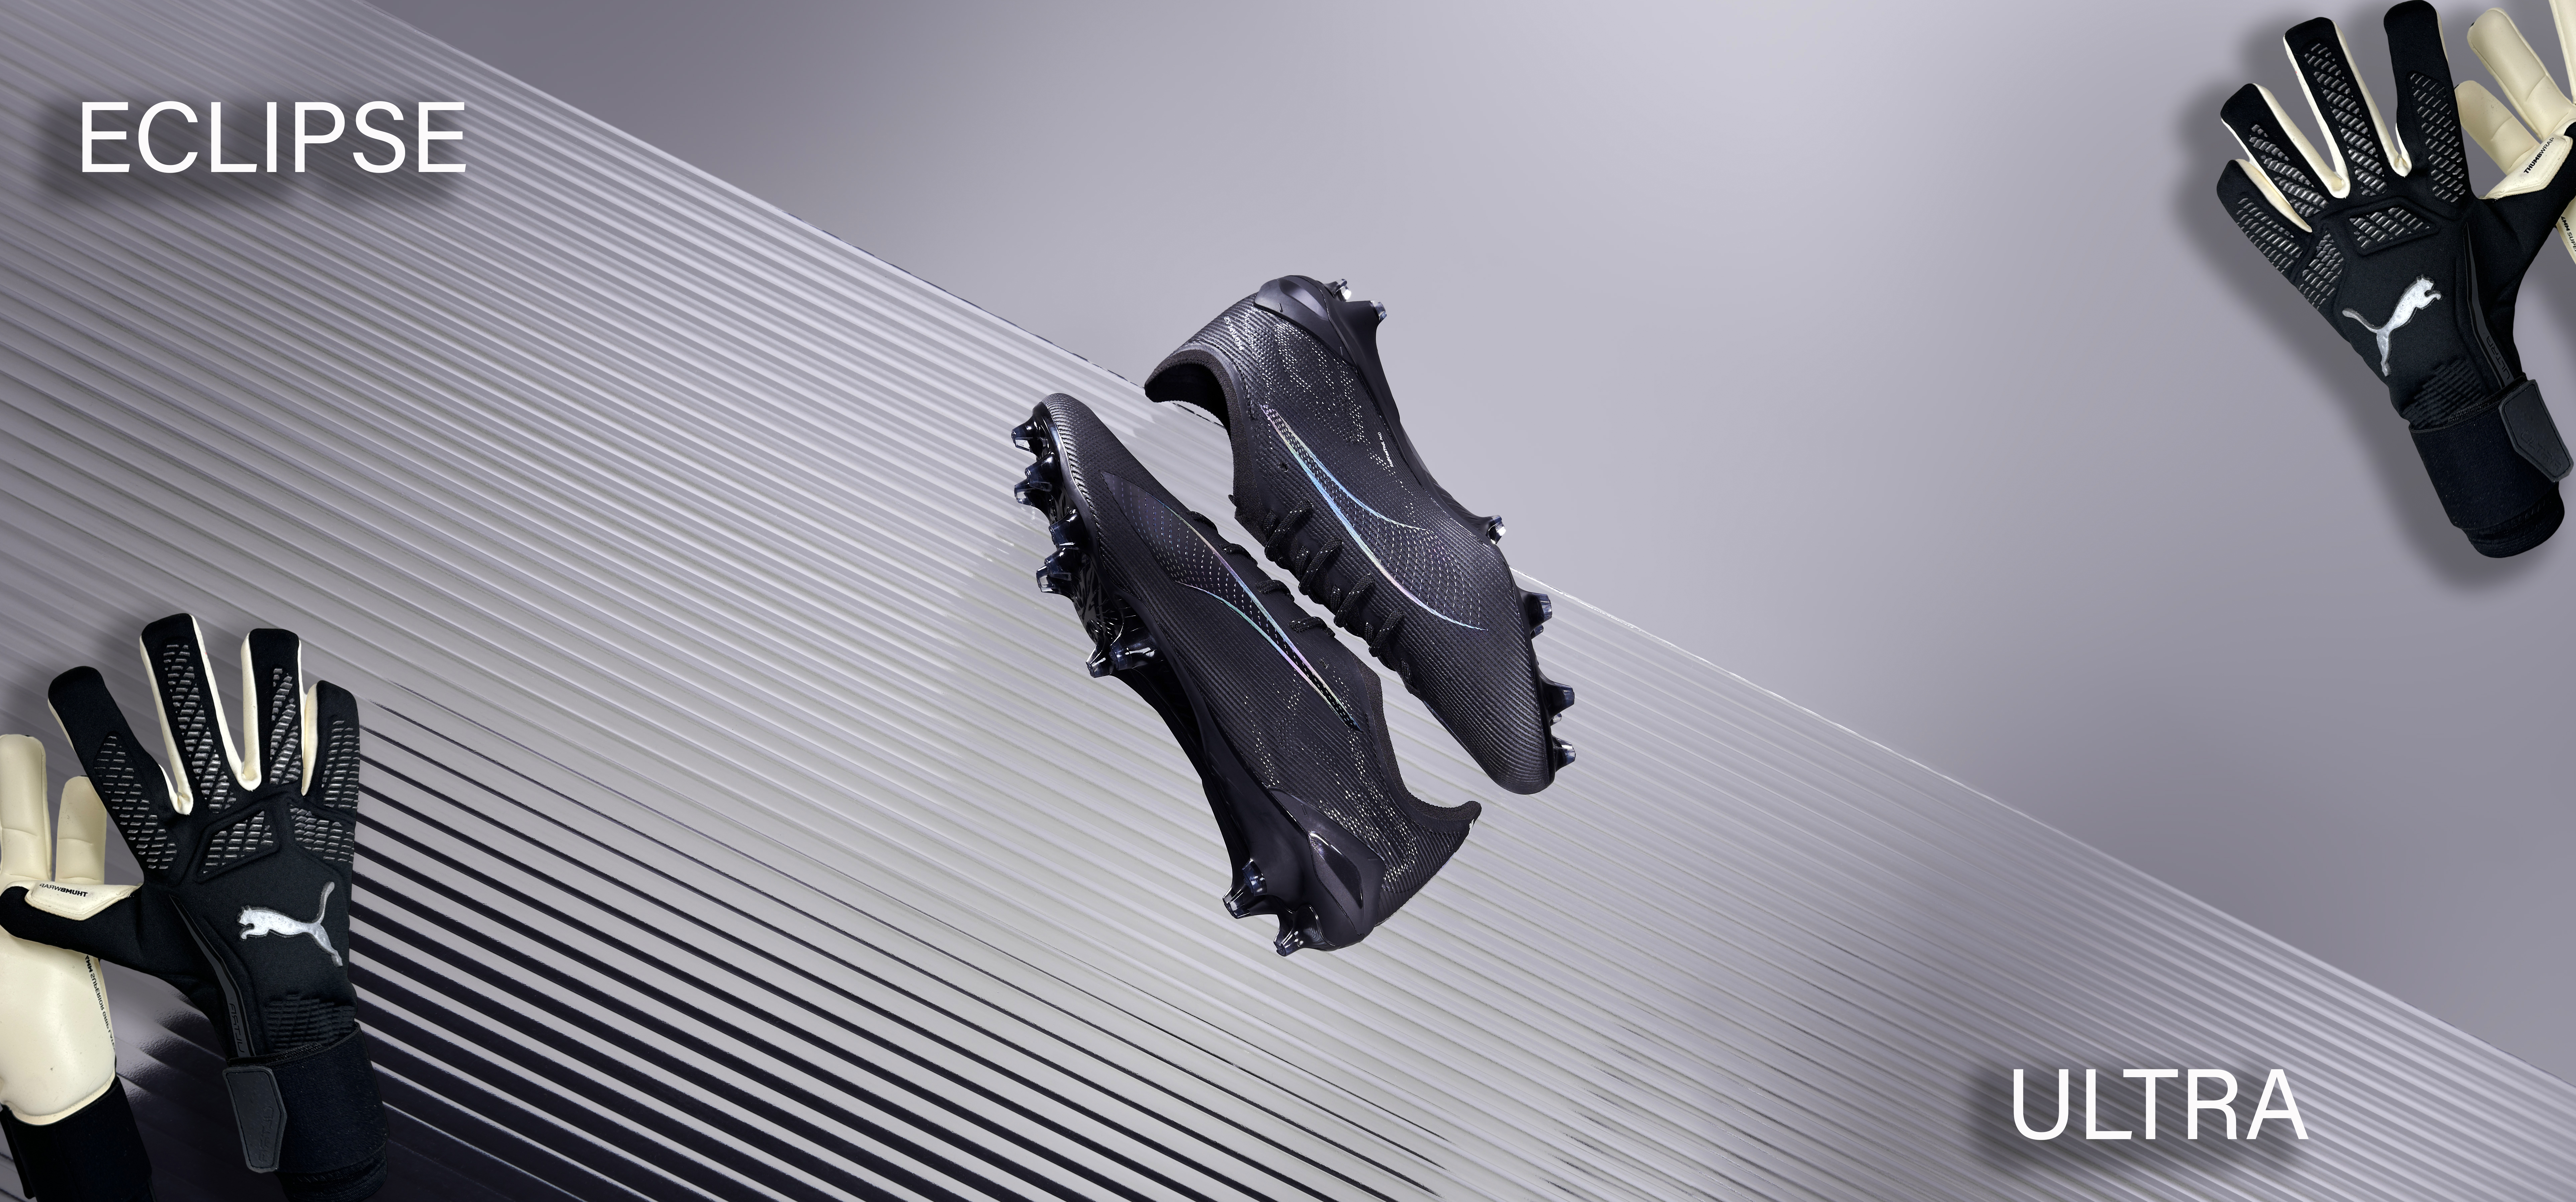 24AW_TS_Football_Eclipse-Pack_Ultra_Product-only_0528_RGB Kopie